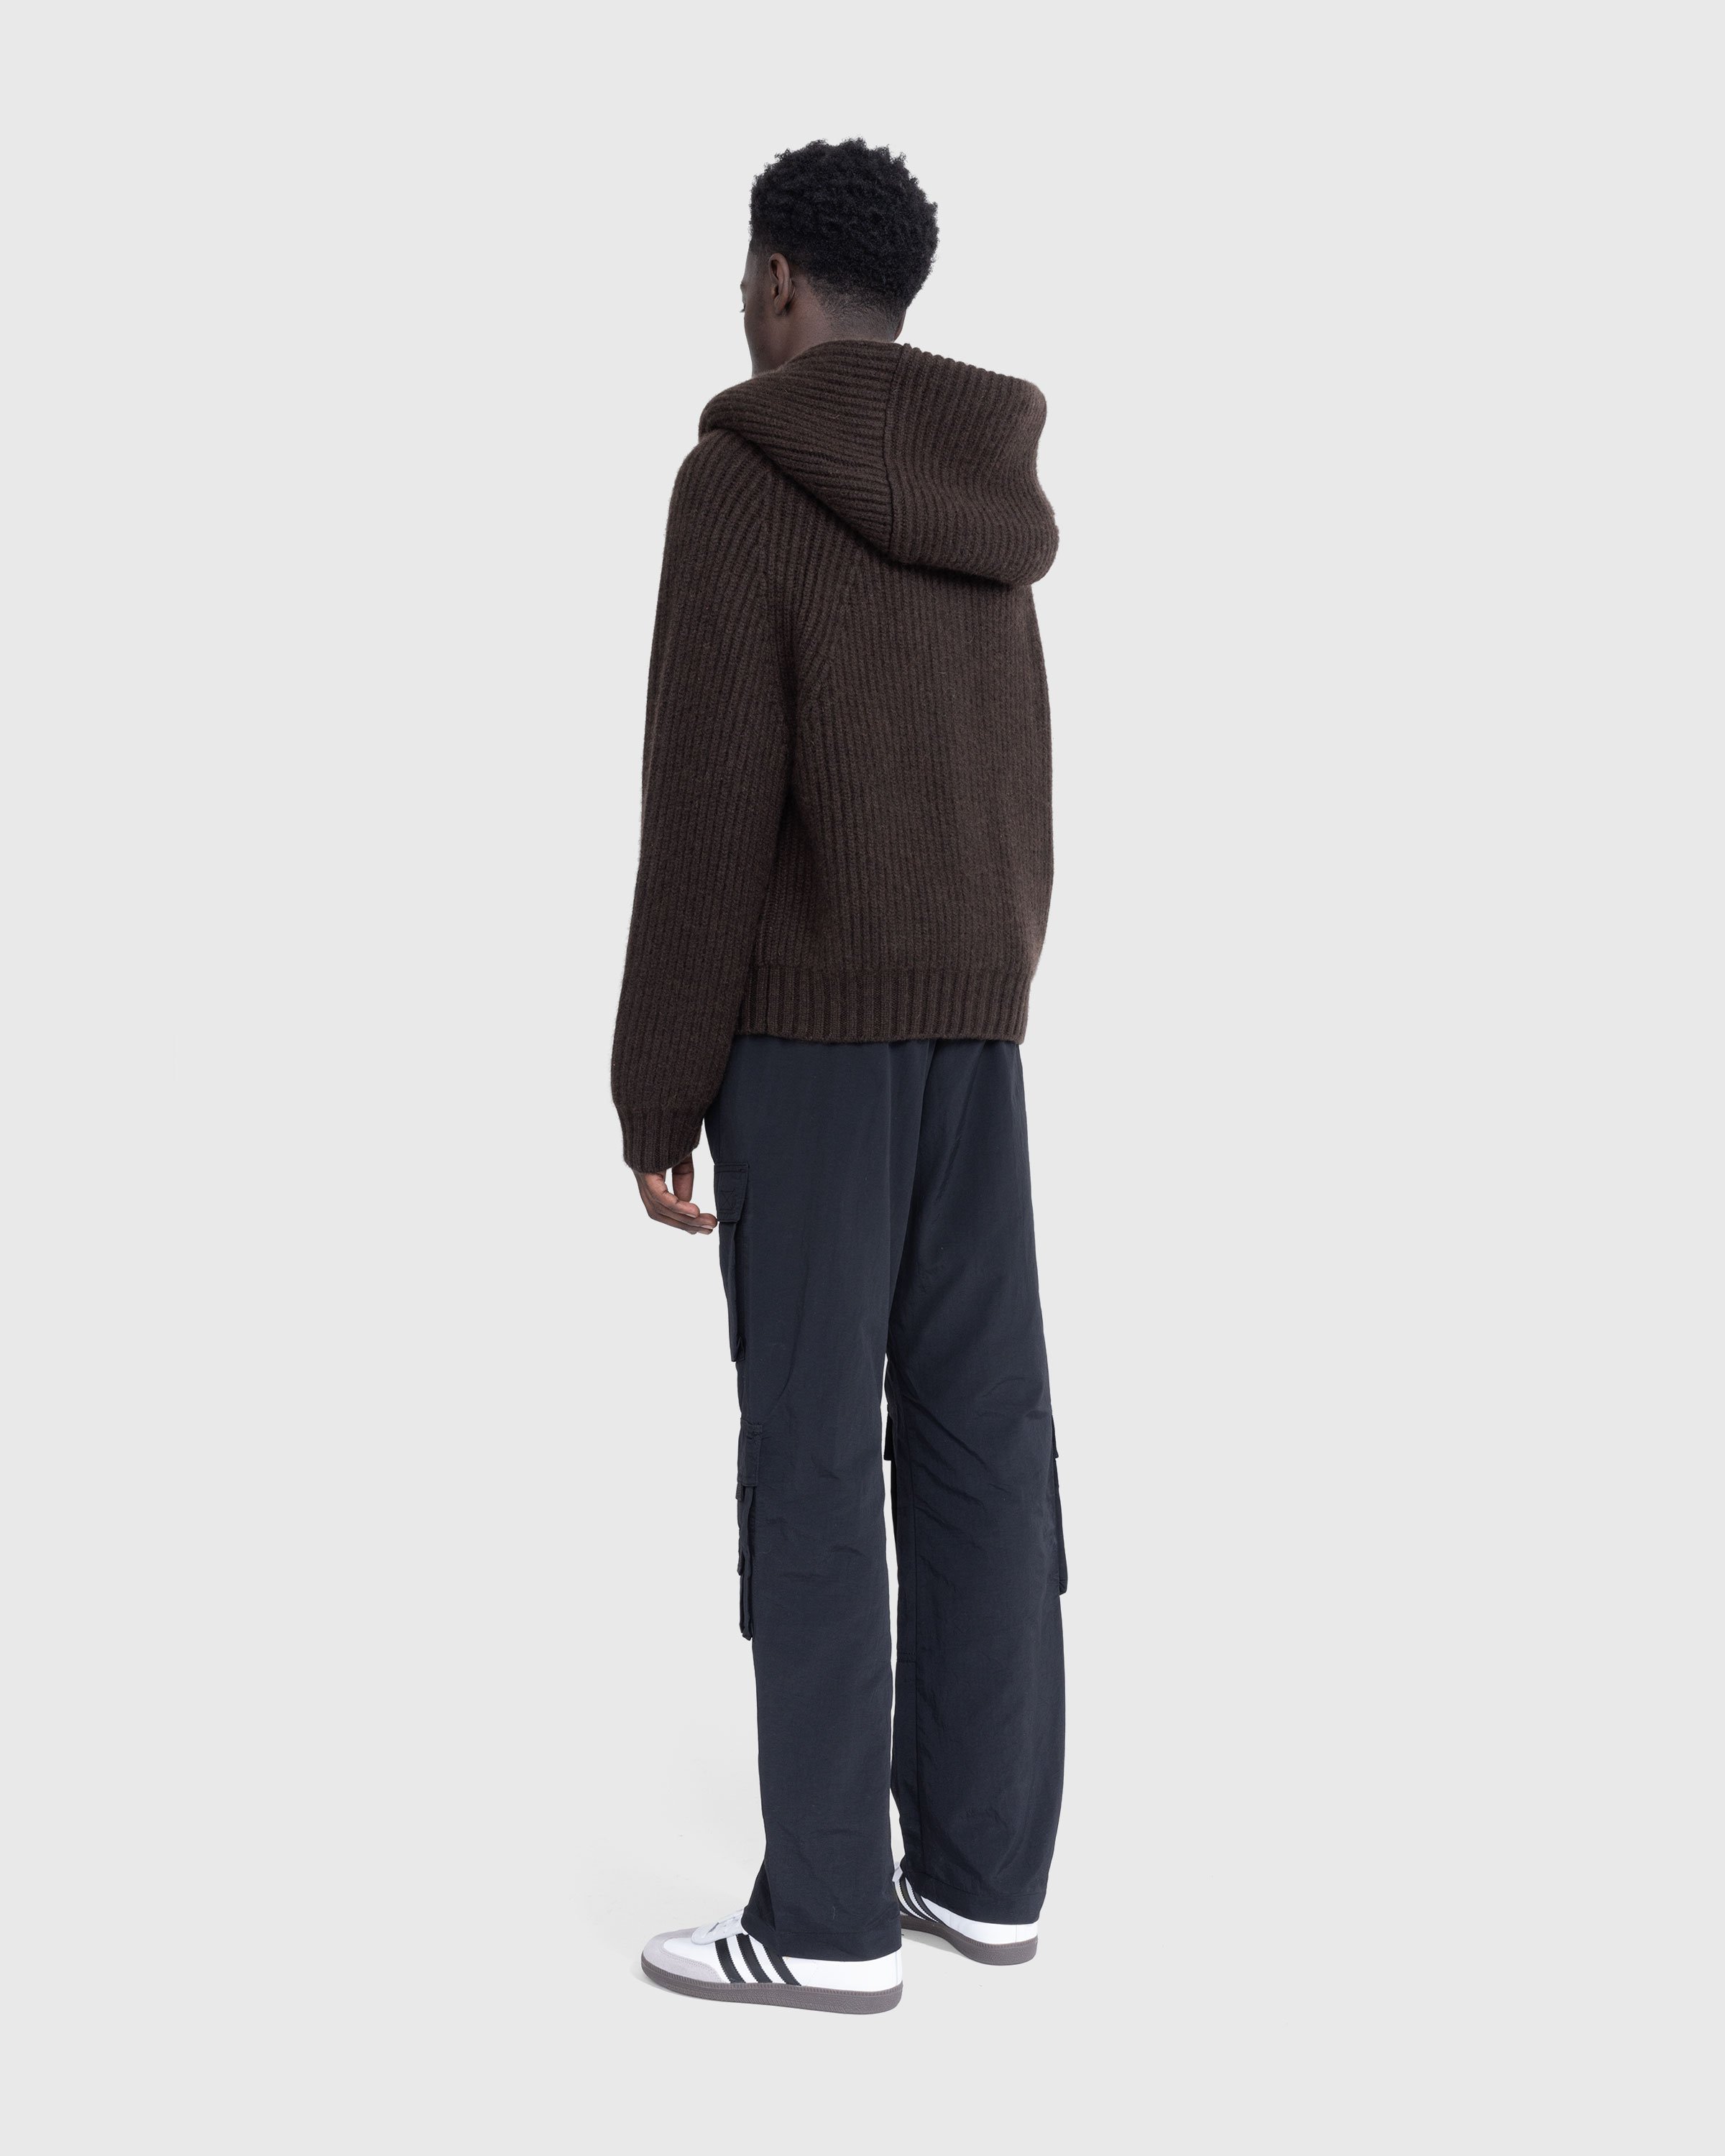 Meta Campania Collective - Michel Exaggerated Rib Cashmere Hooded Cardigan Dark Chocolate Brown - Clothing - Brown - Image 4